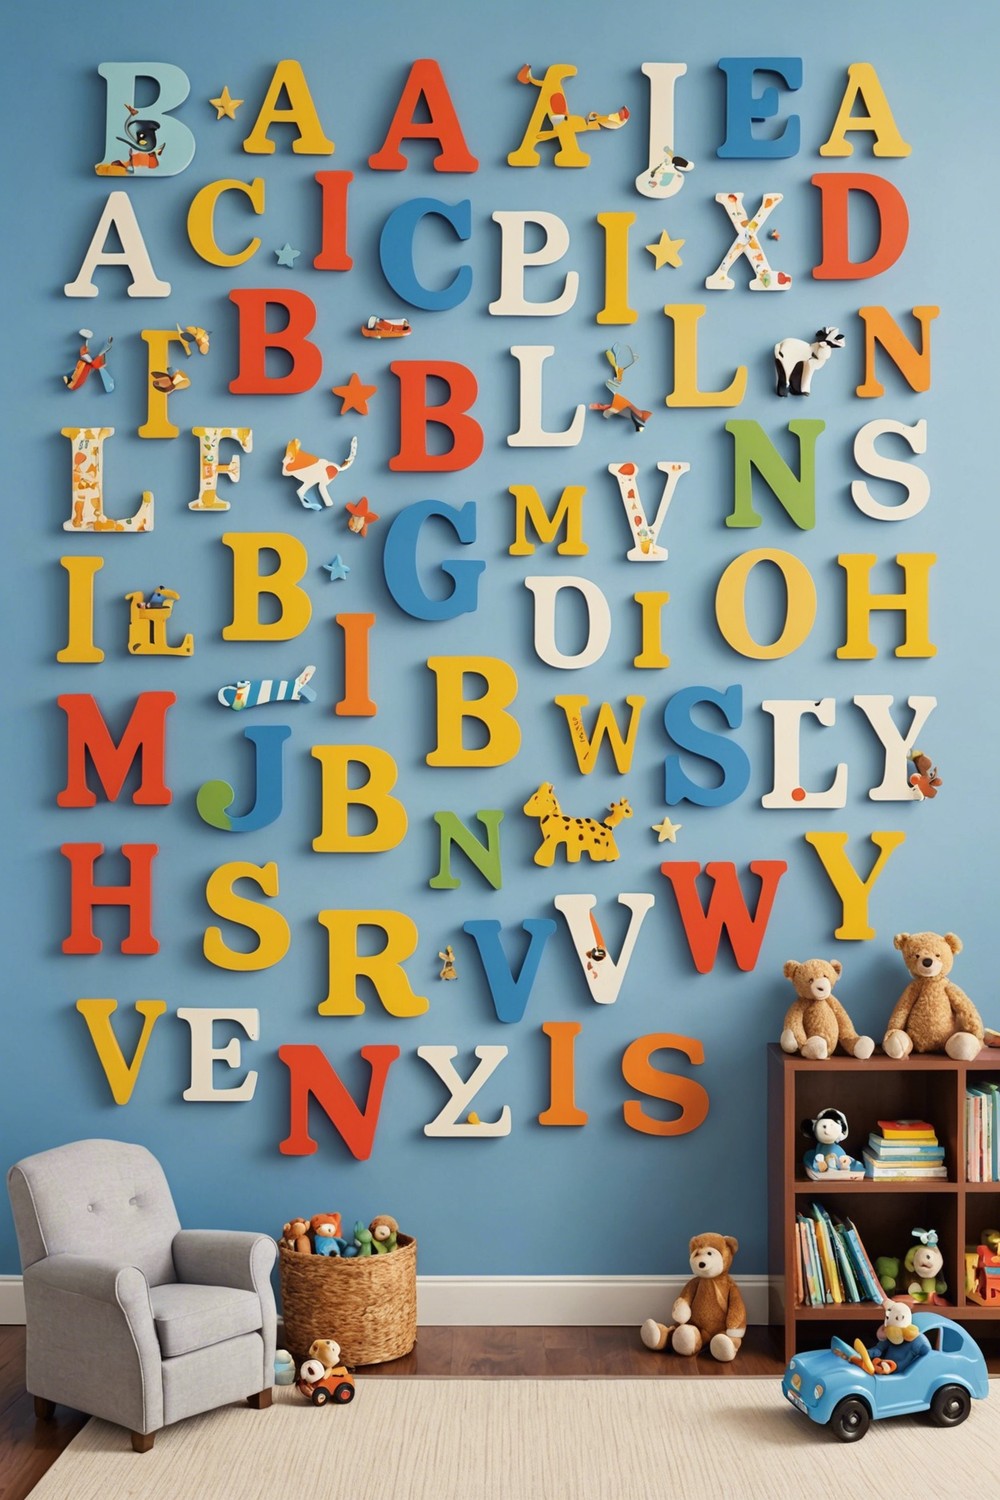 Alphabet Wall Art for a Fun Learning Environment